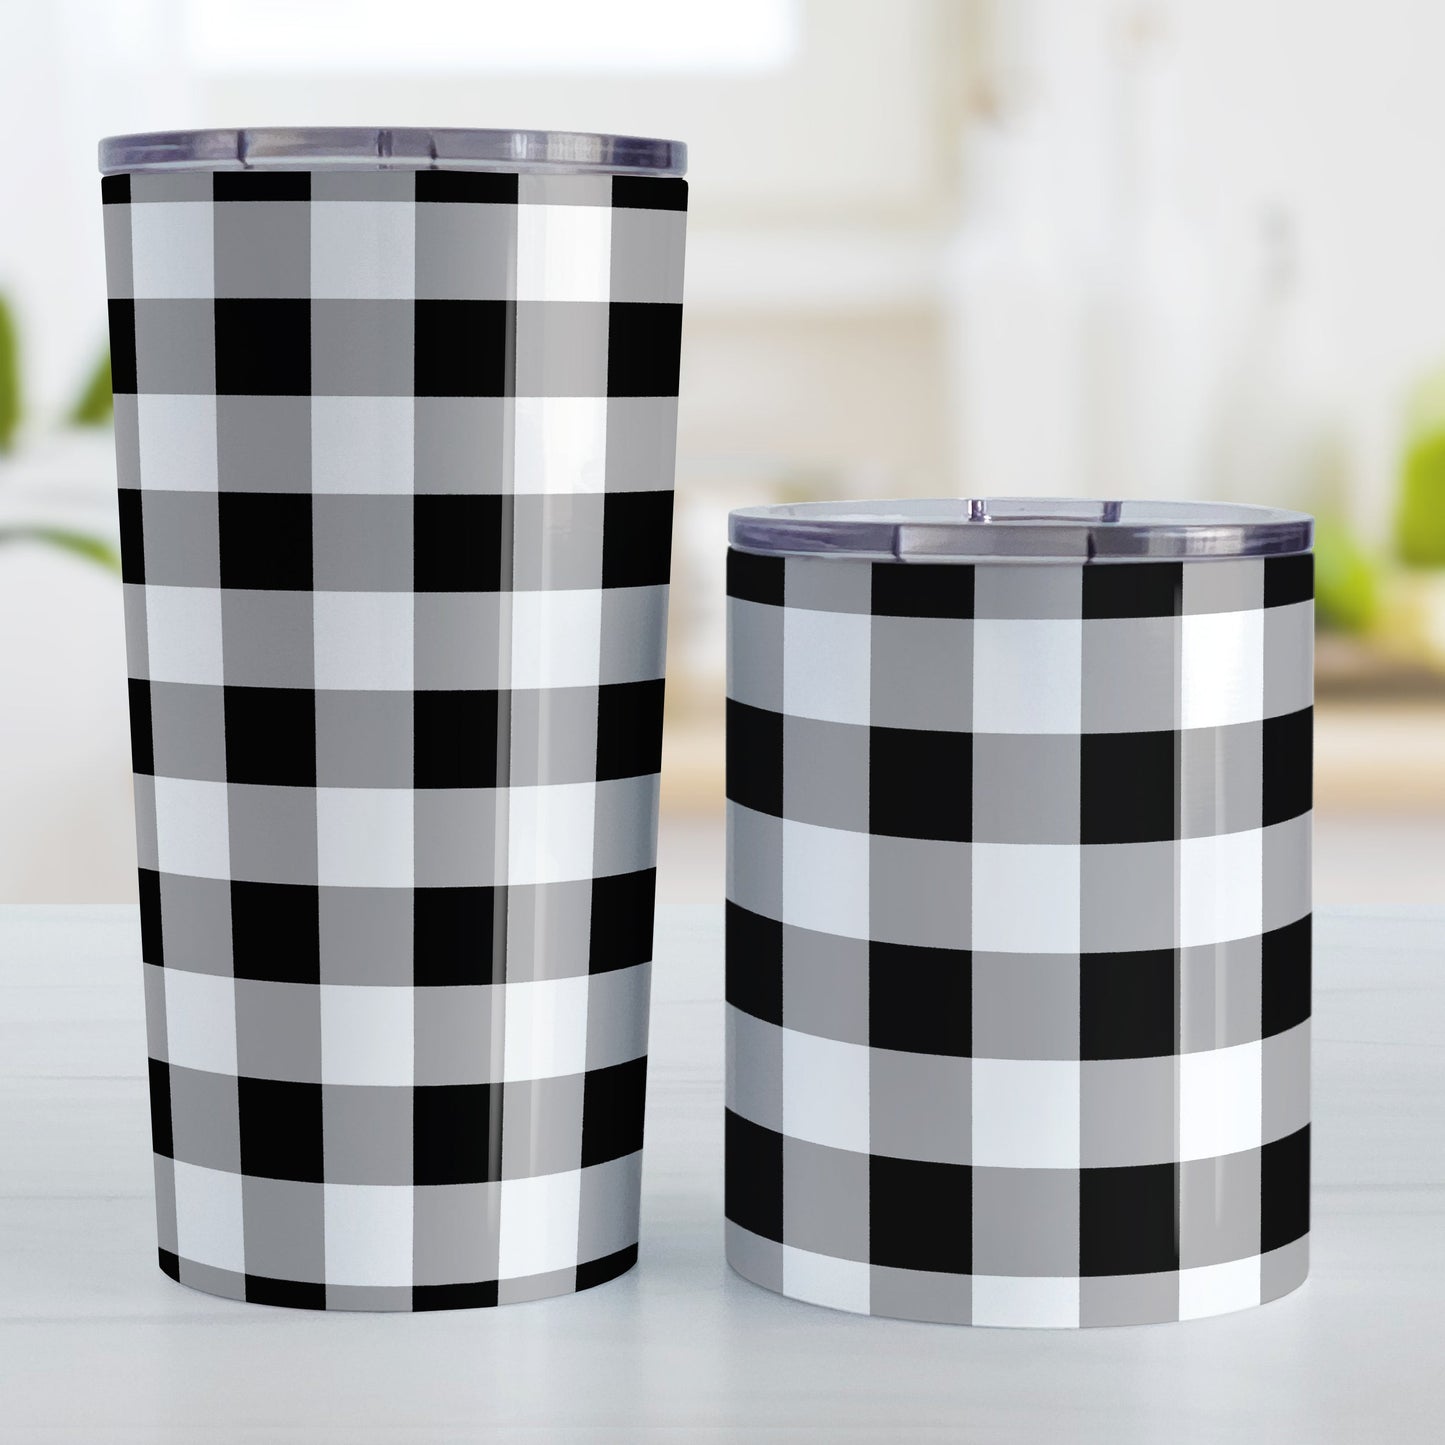 Black and White Buffalo Plaid Tumbler Cup (20oz and 10oz, stainless steel insulated) at Amy's Coffee Mugs. Tumbler cups designed with a black and white buffalo plaid (buffalo check) pattern that wraps around the cups. The photo shows both sized cups next to each other.